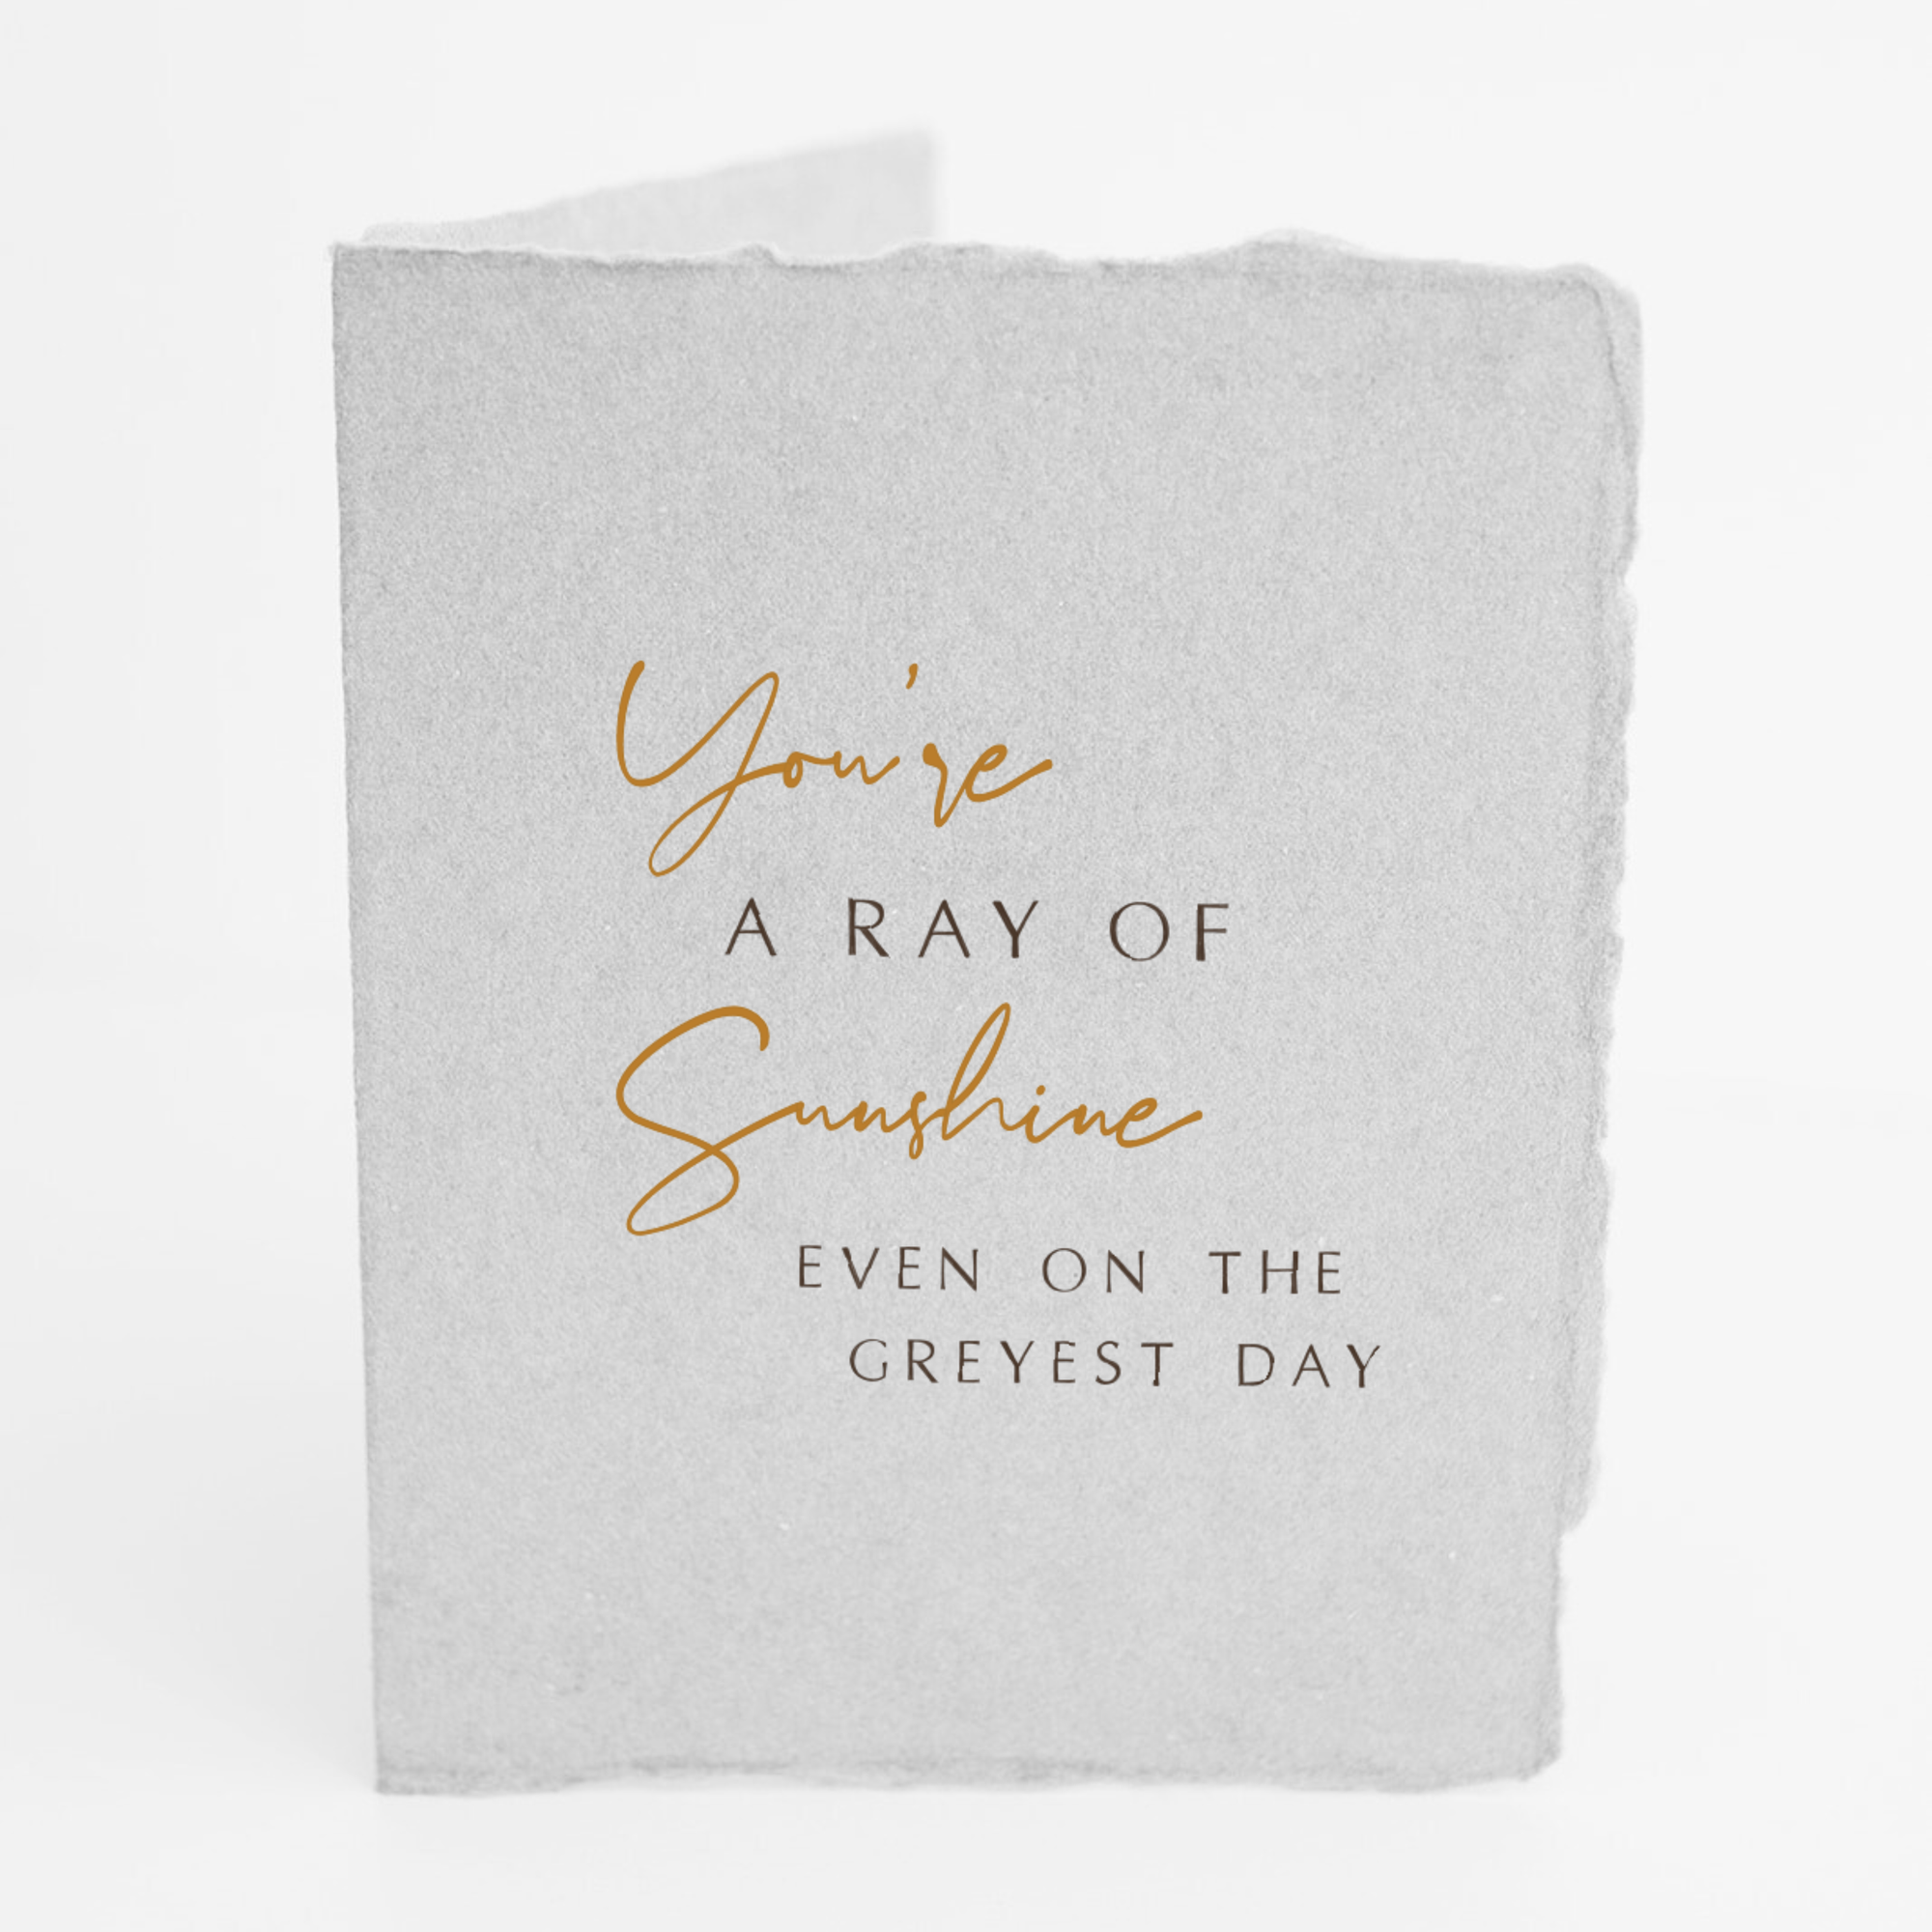 Handmade Paper "You're a ray of sunshine." Love Friend Greeting Card